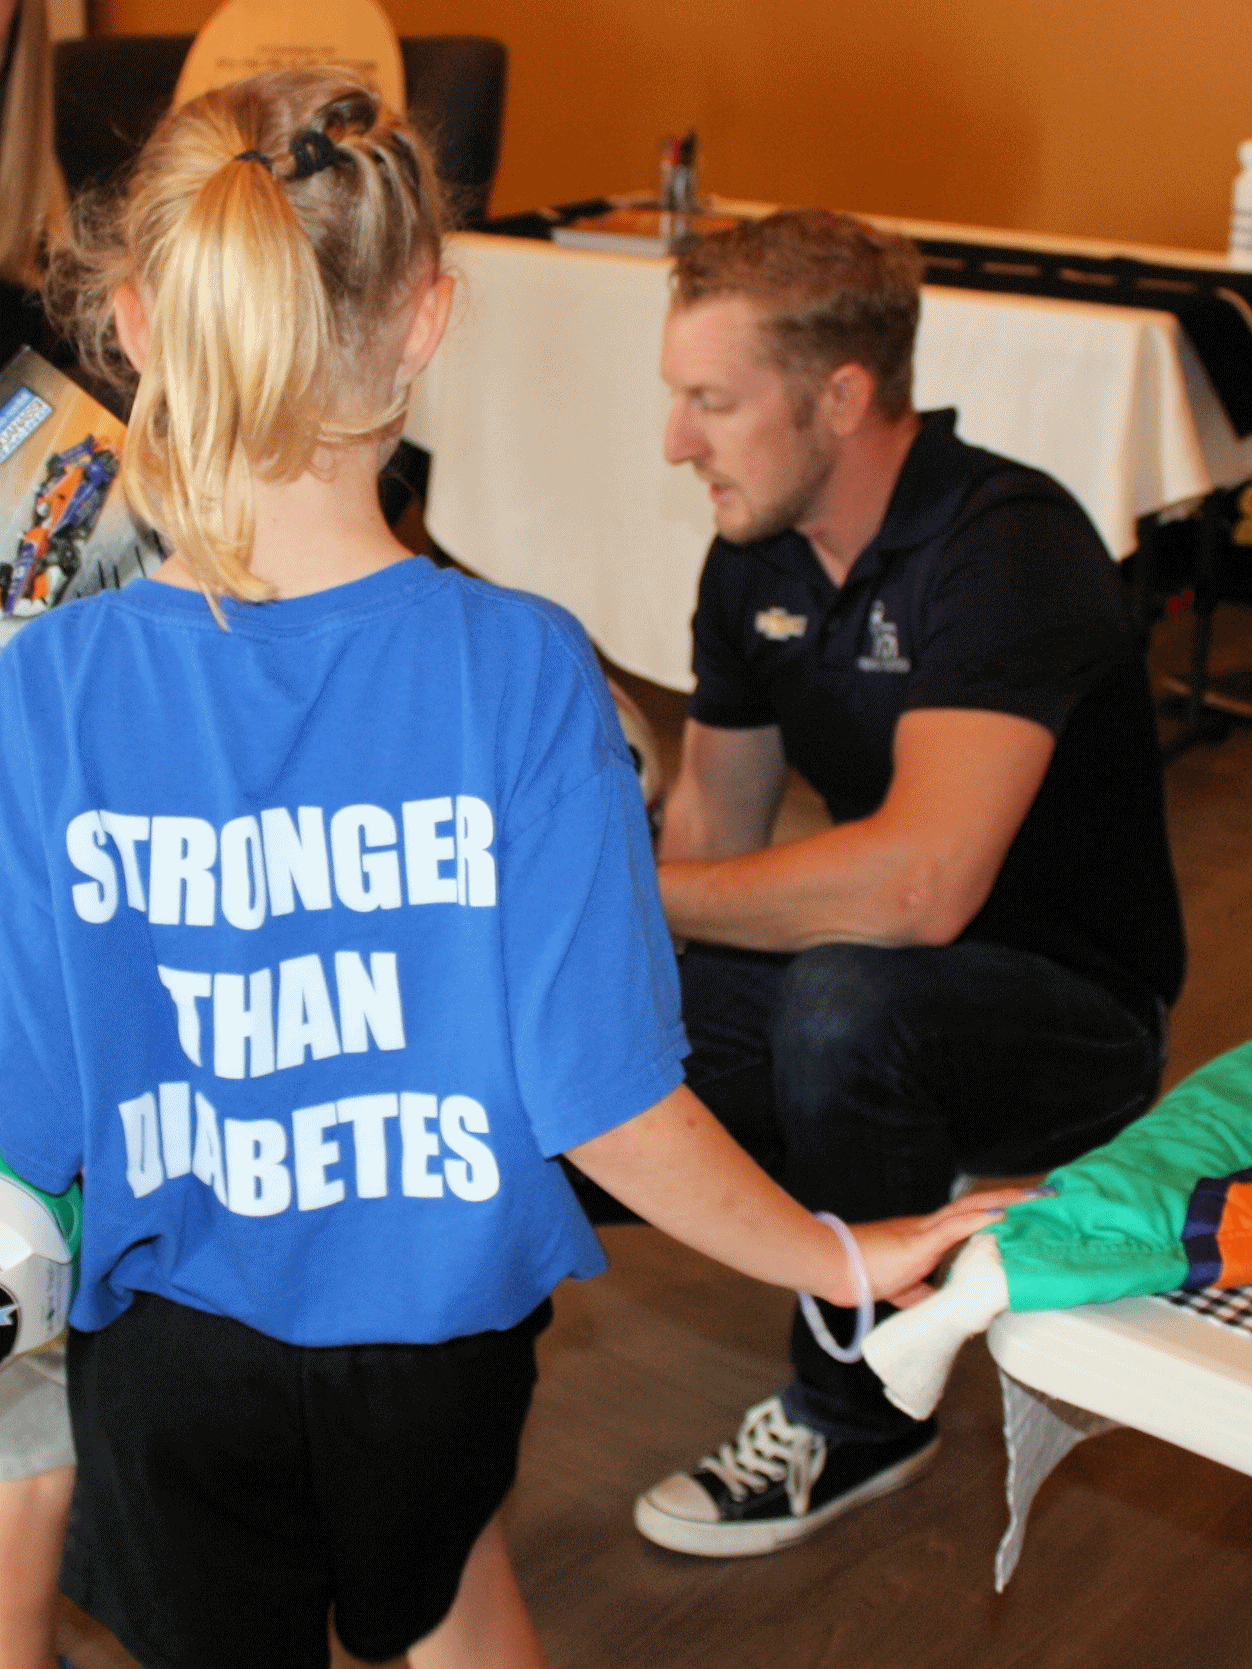 Charlie Kimball at Diabetes Kids Day event